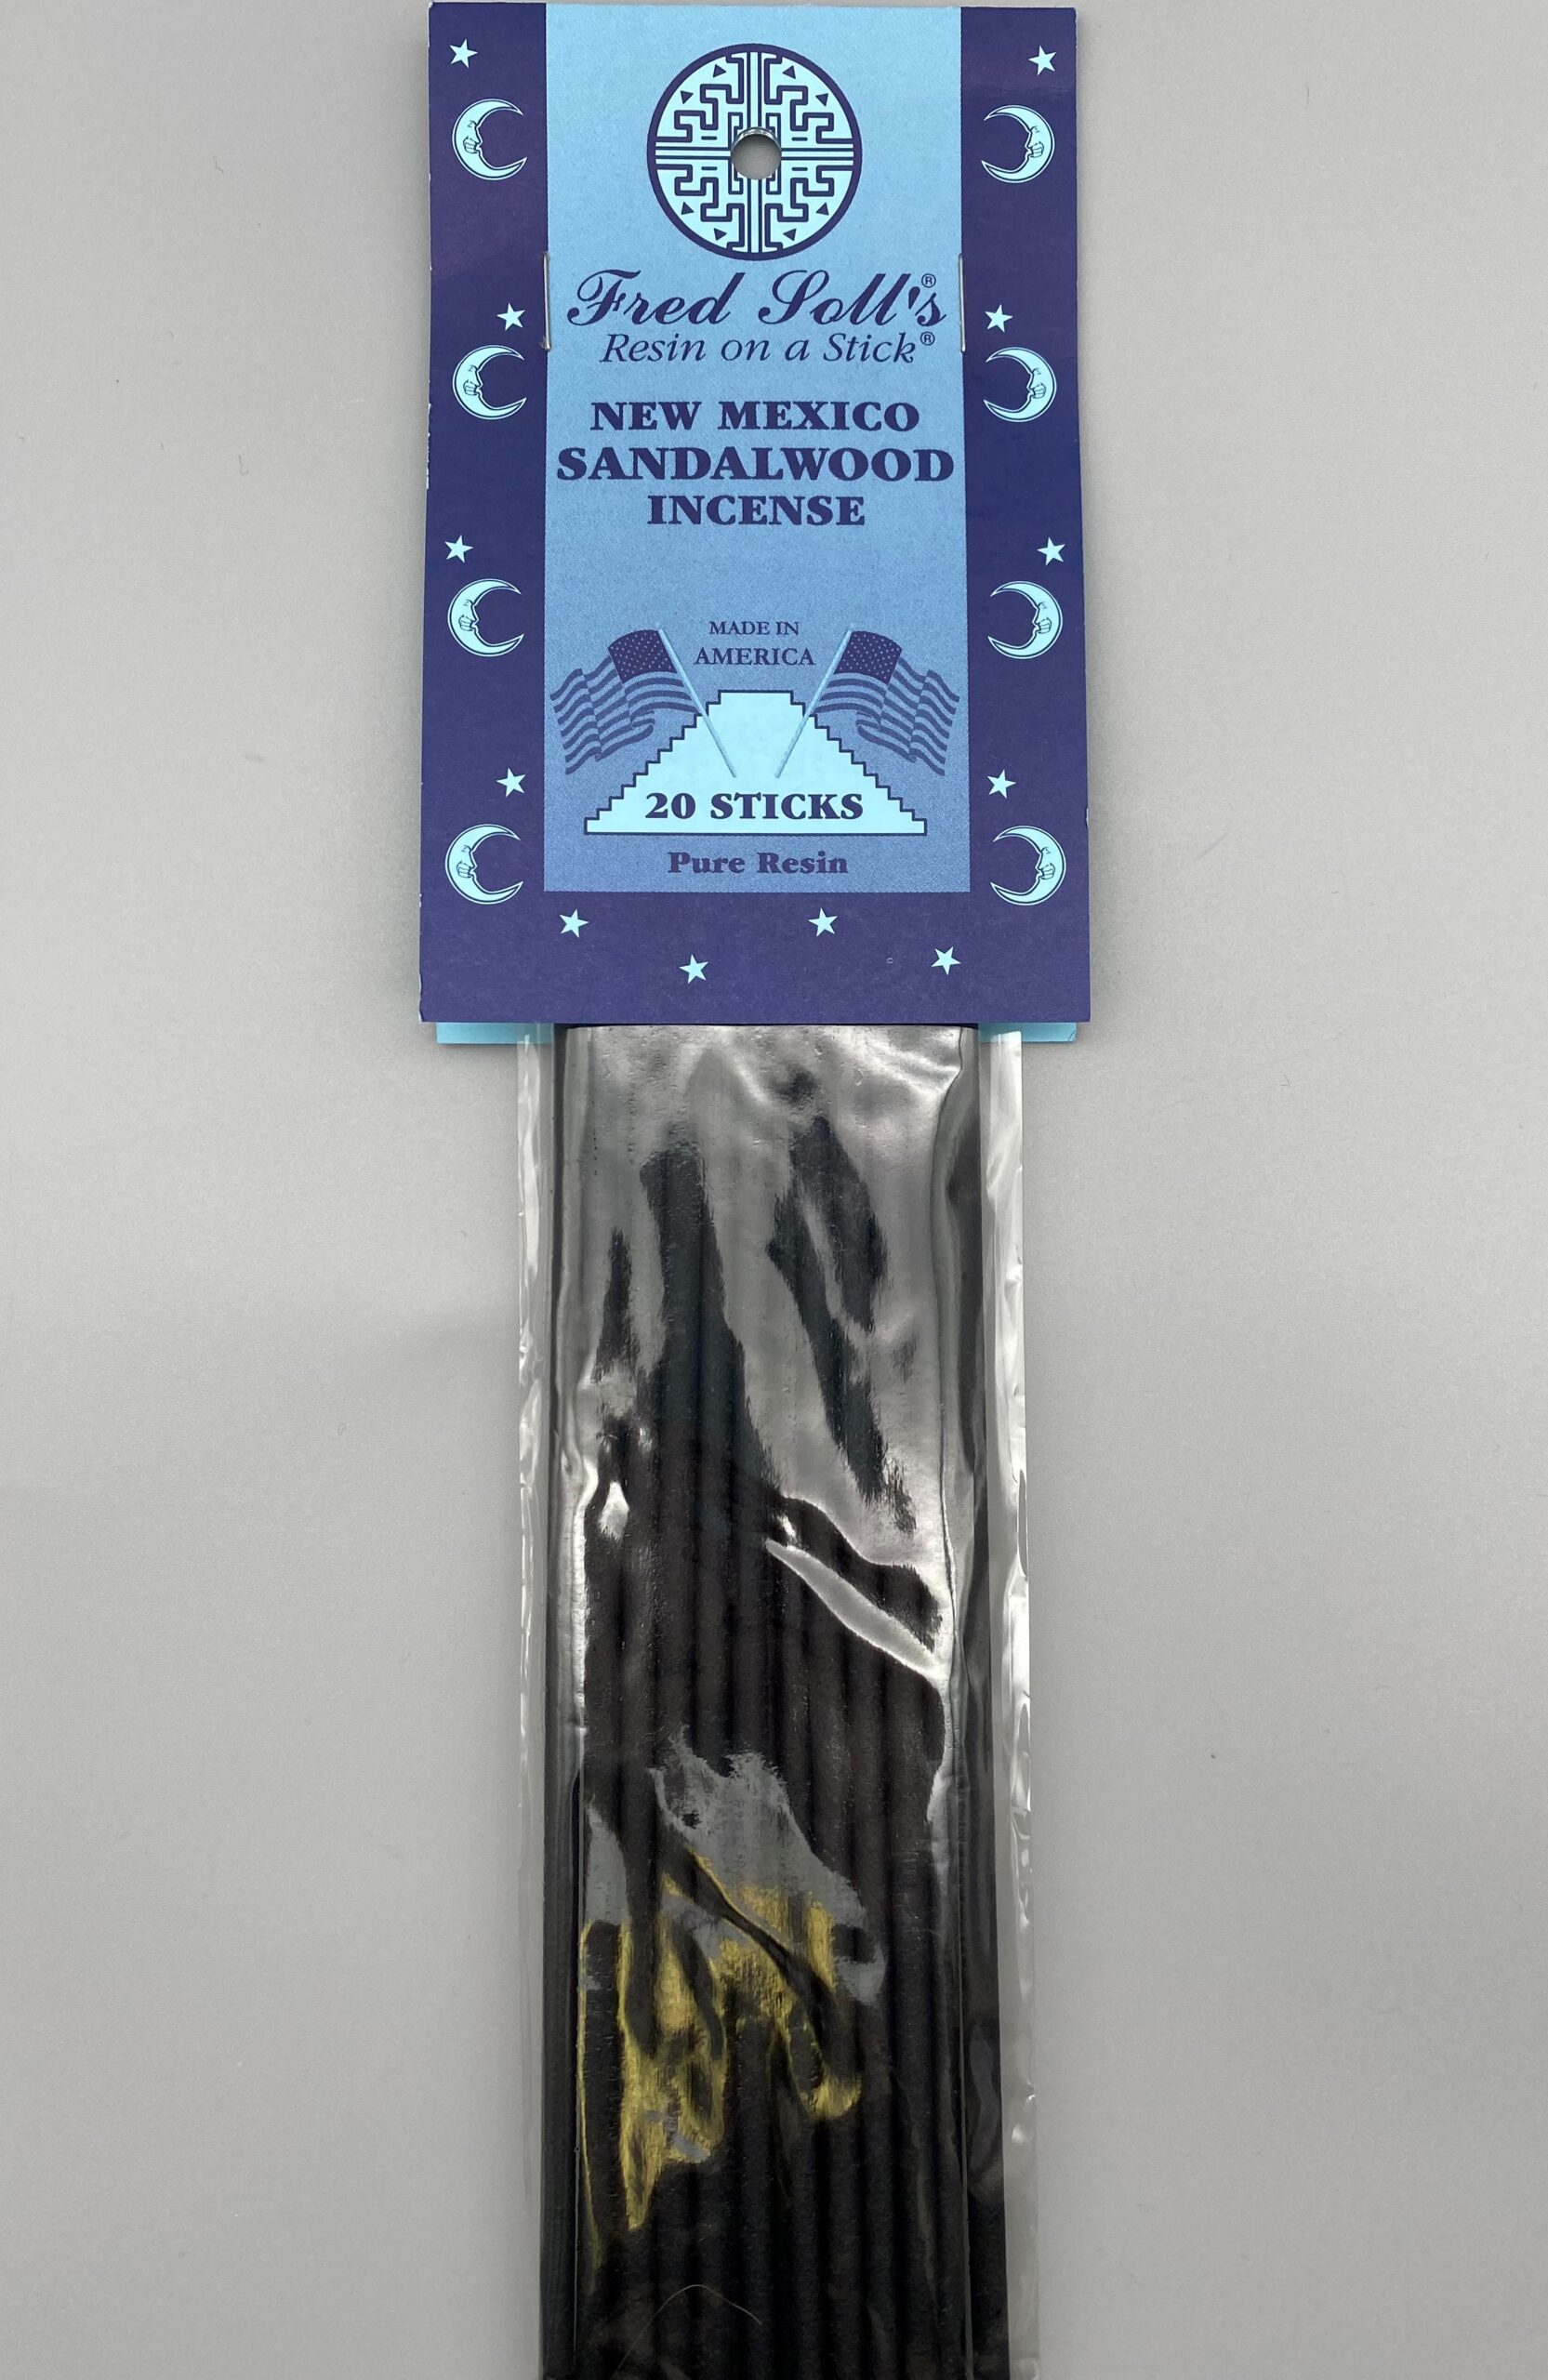 New Mexico Sandalwood Fred Soll Incense – A Time for Karma